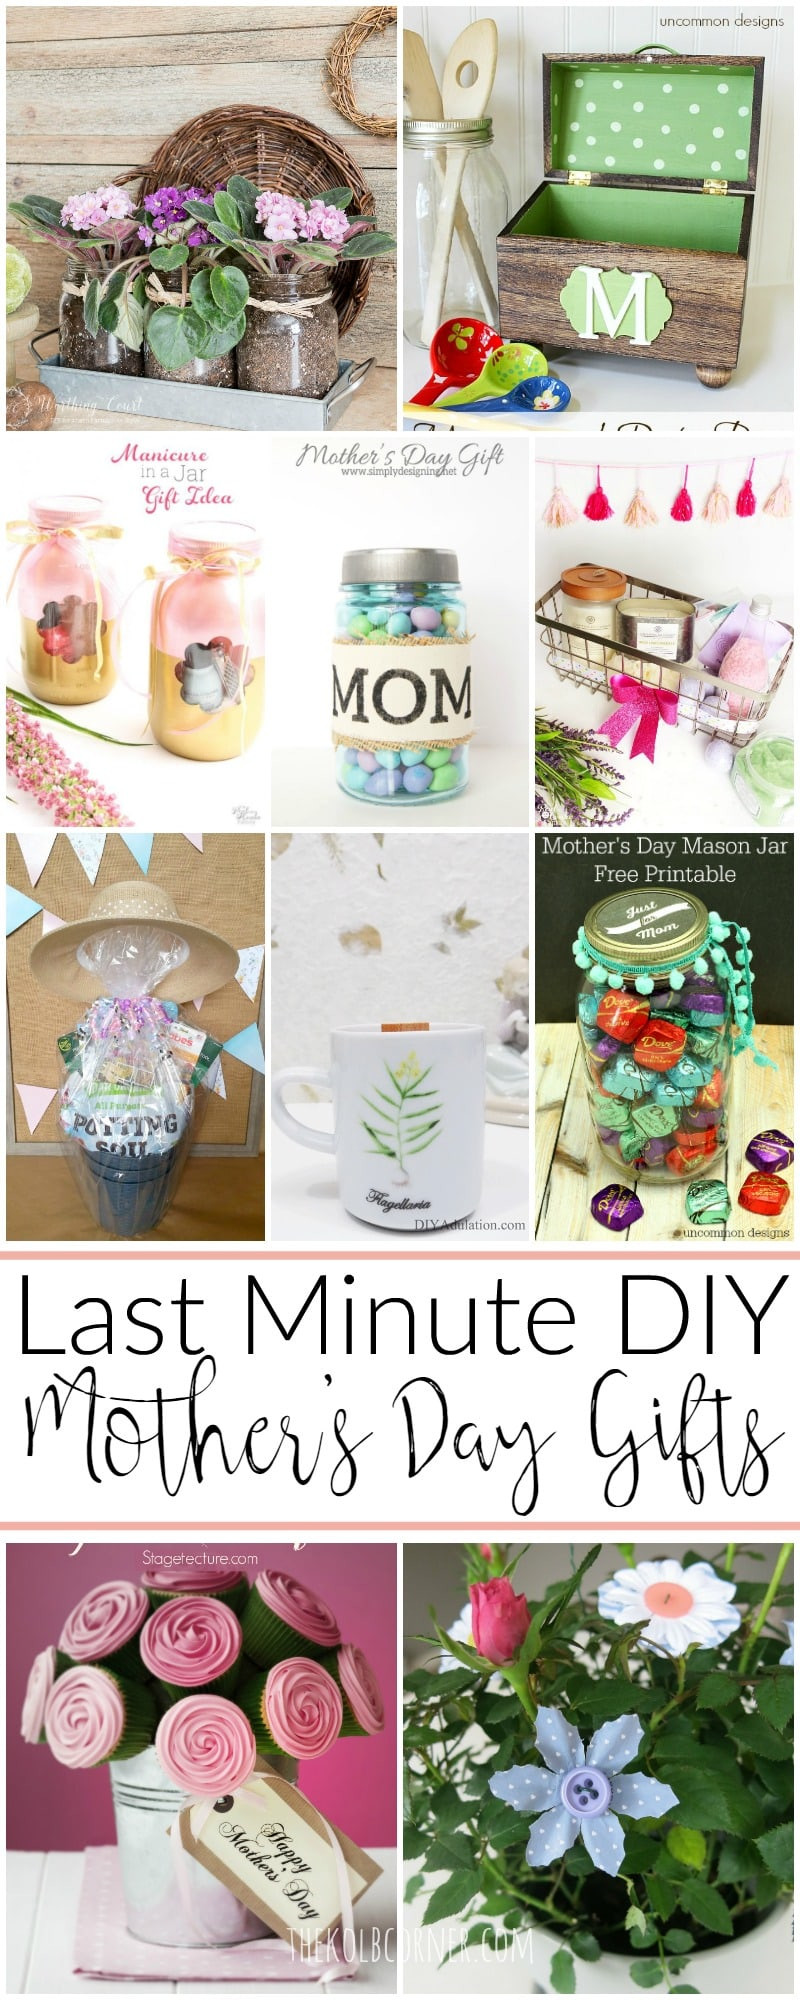 Creative Mother Day Gift Ideas
 Last Minute DIY Mother s Day Gift Ideas